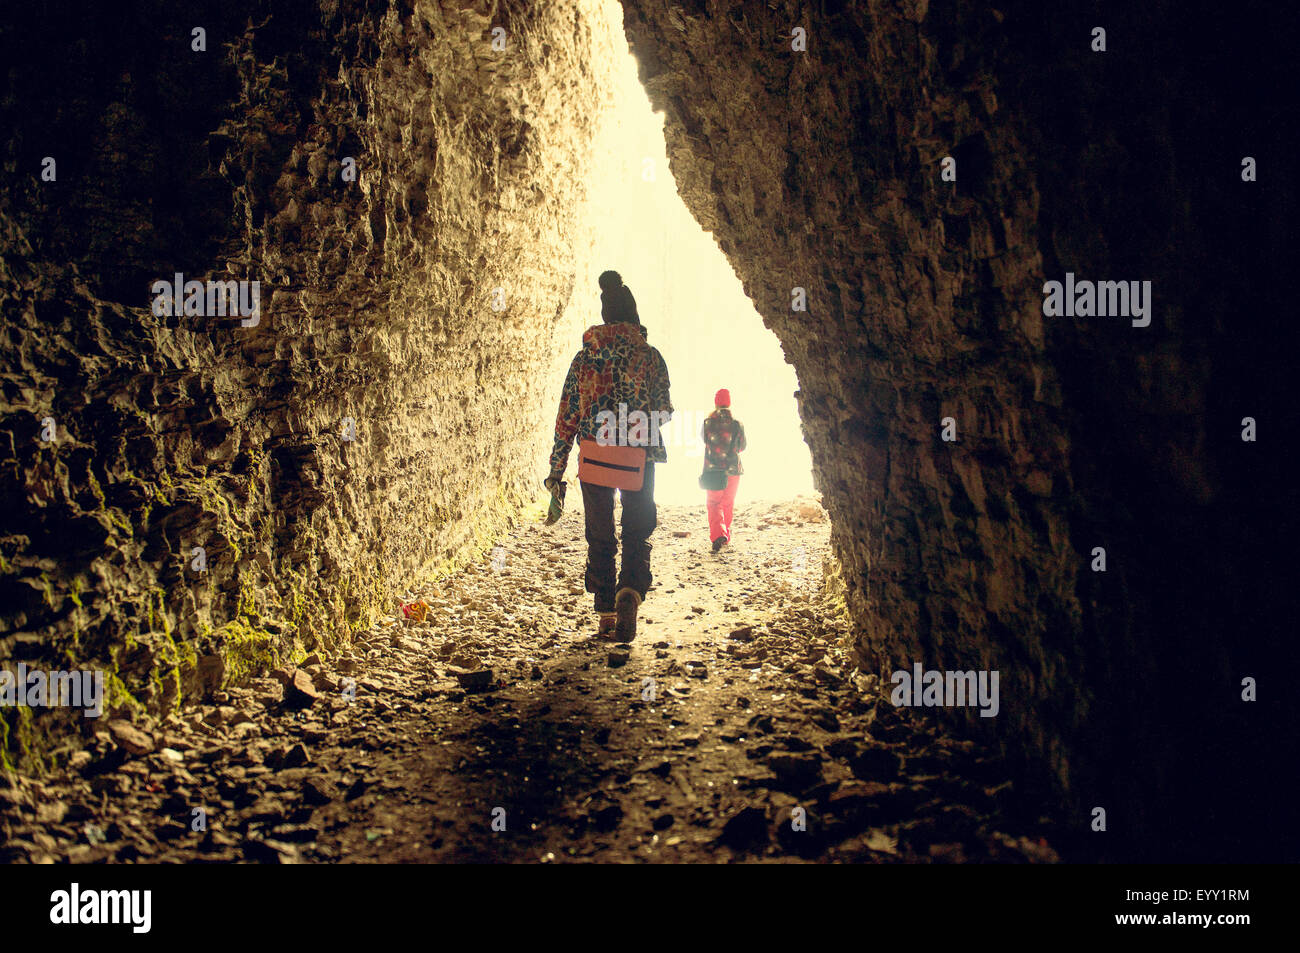 Caucasian hikers walking in rocky cave Stock Photo